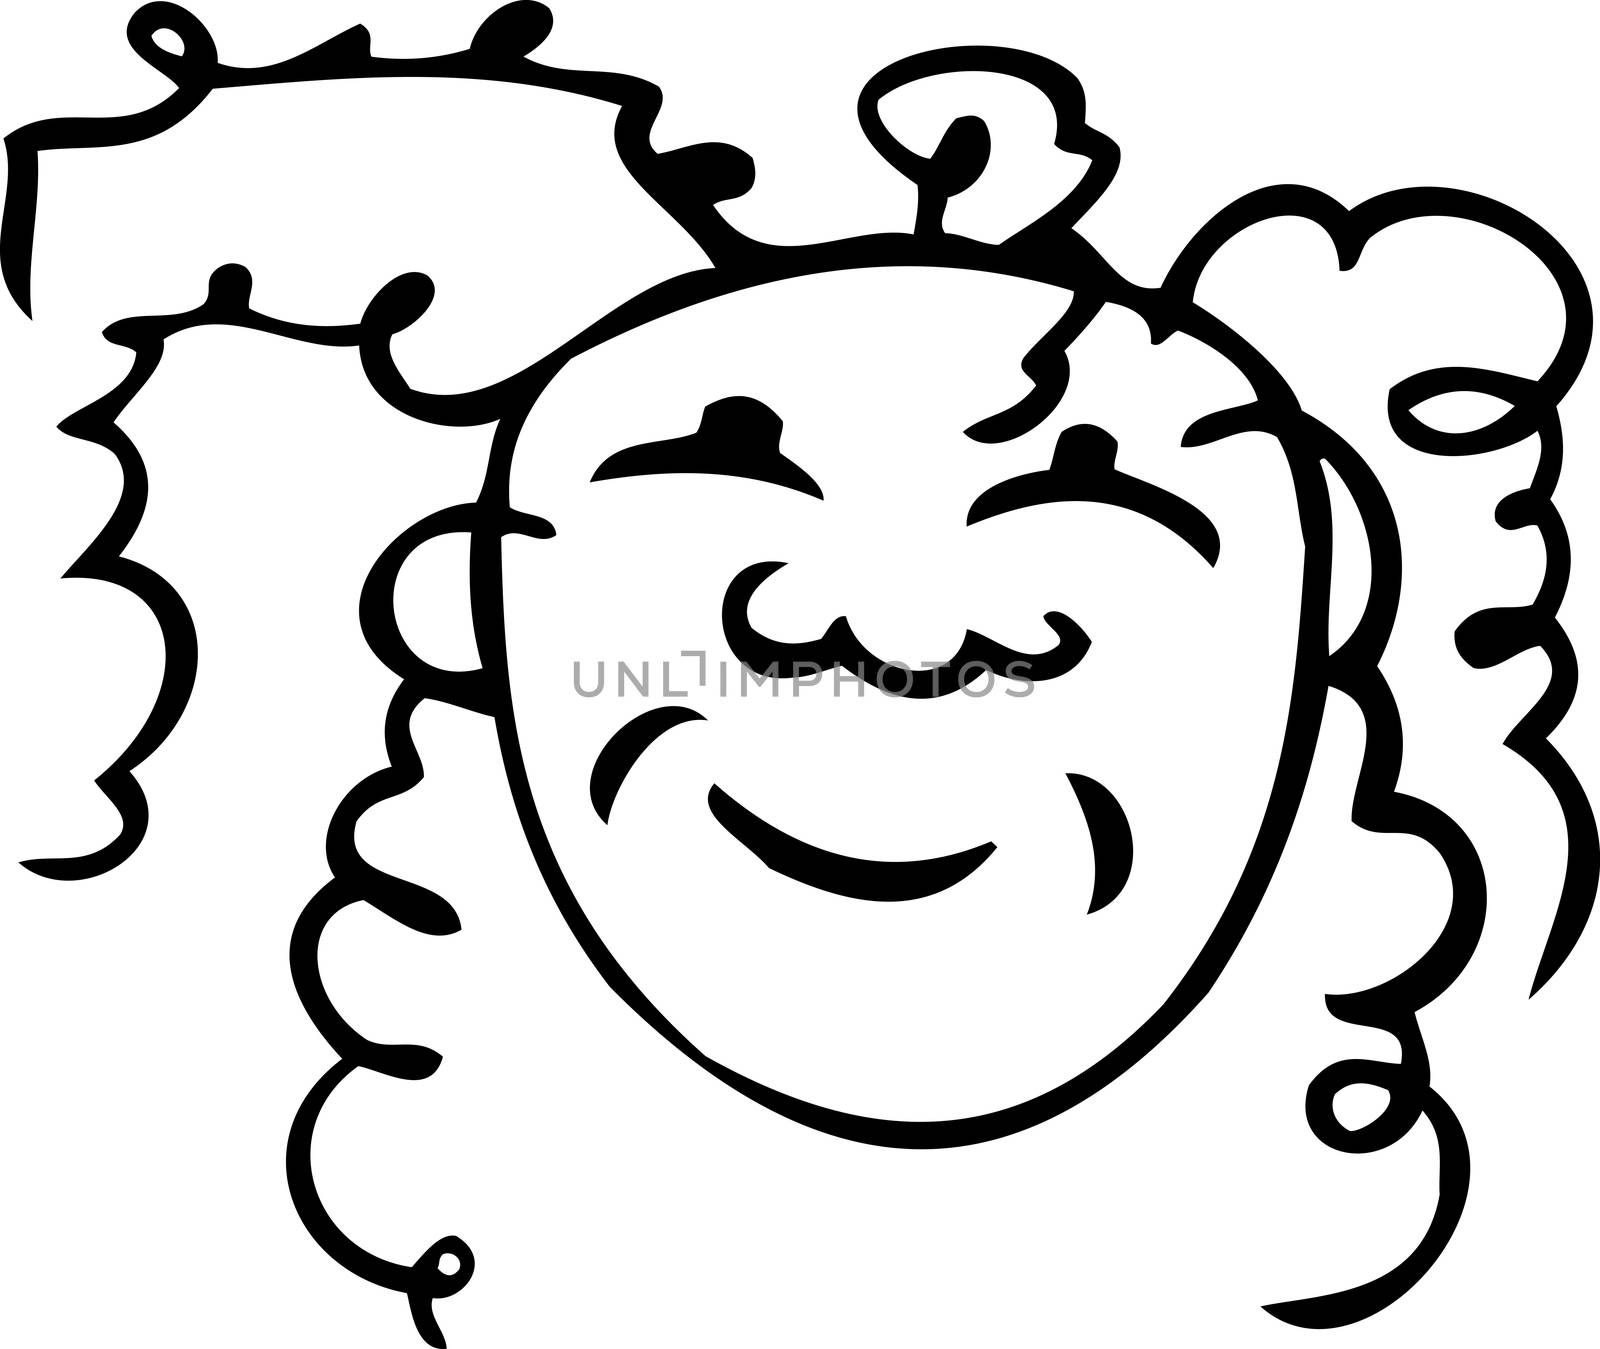 Outlined icon cartoon of cheerful person with dreadlocks